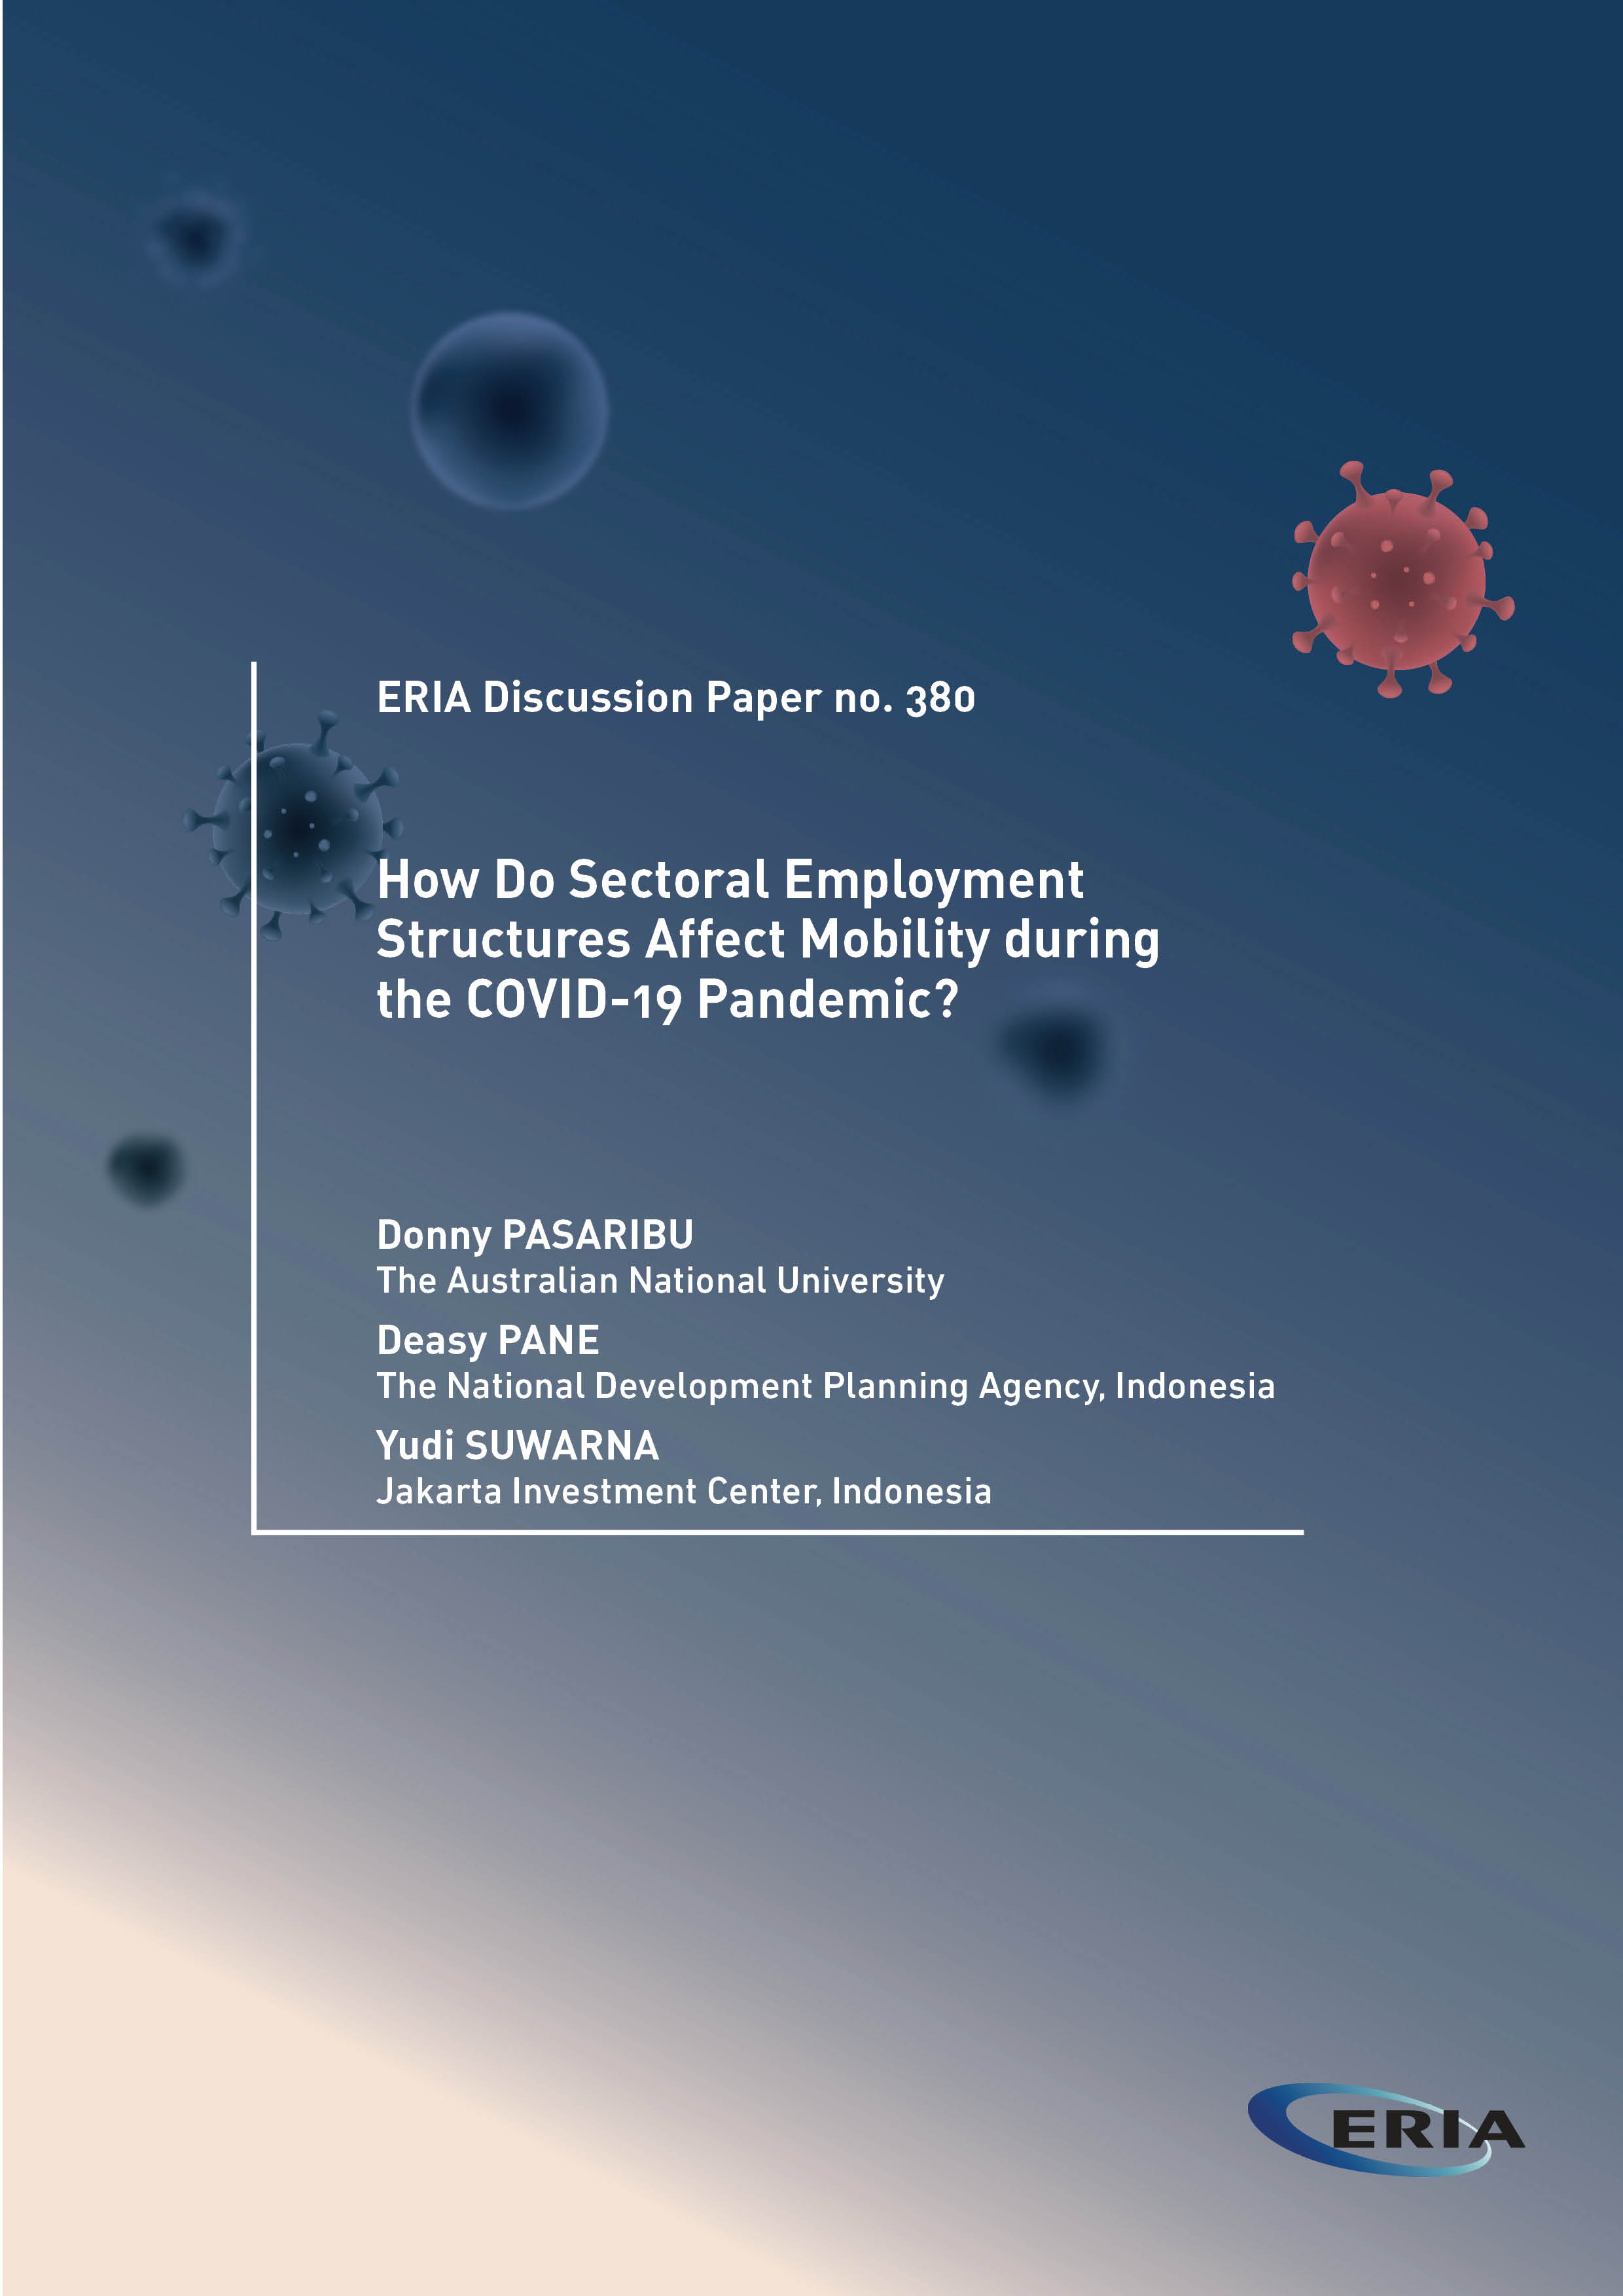 How Do Sectoral Employment Structures Affect Mobility during the COVID-19 Pandemic?